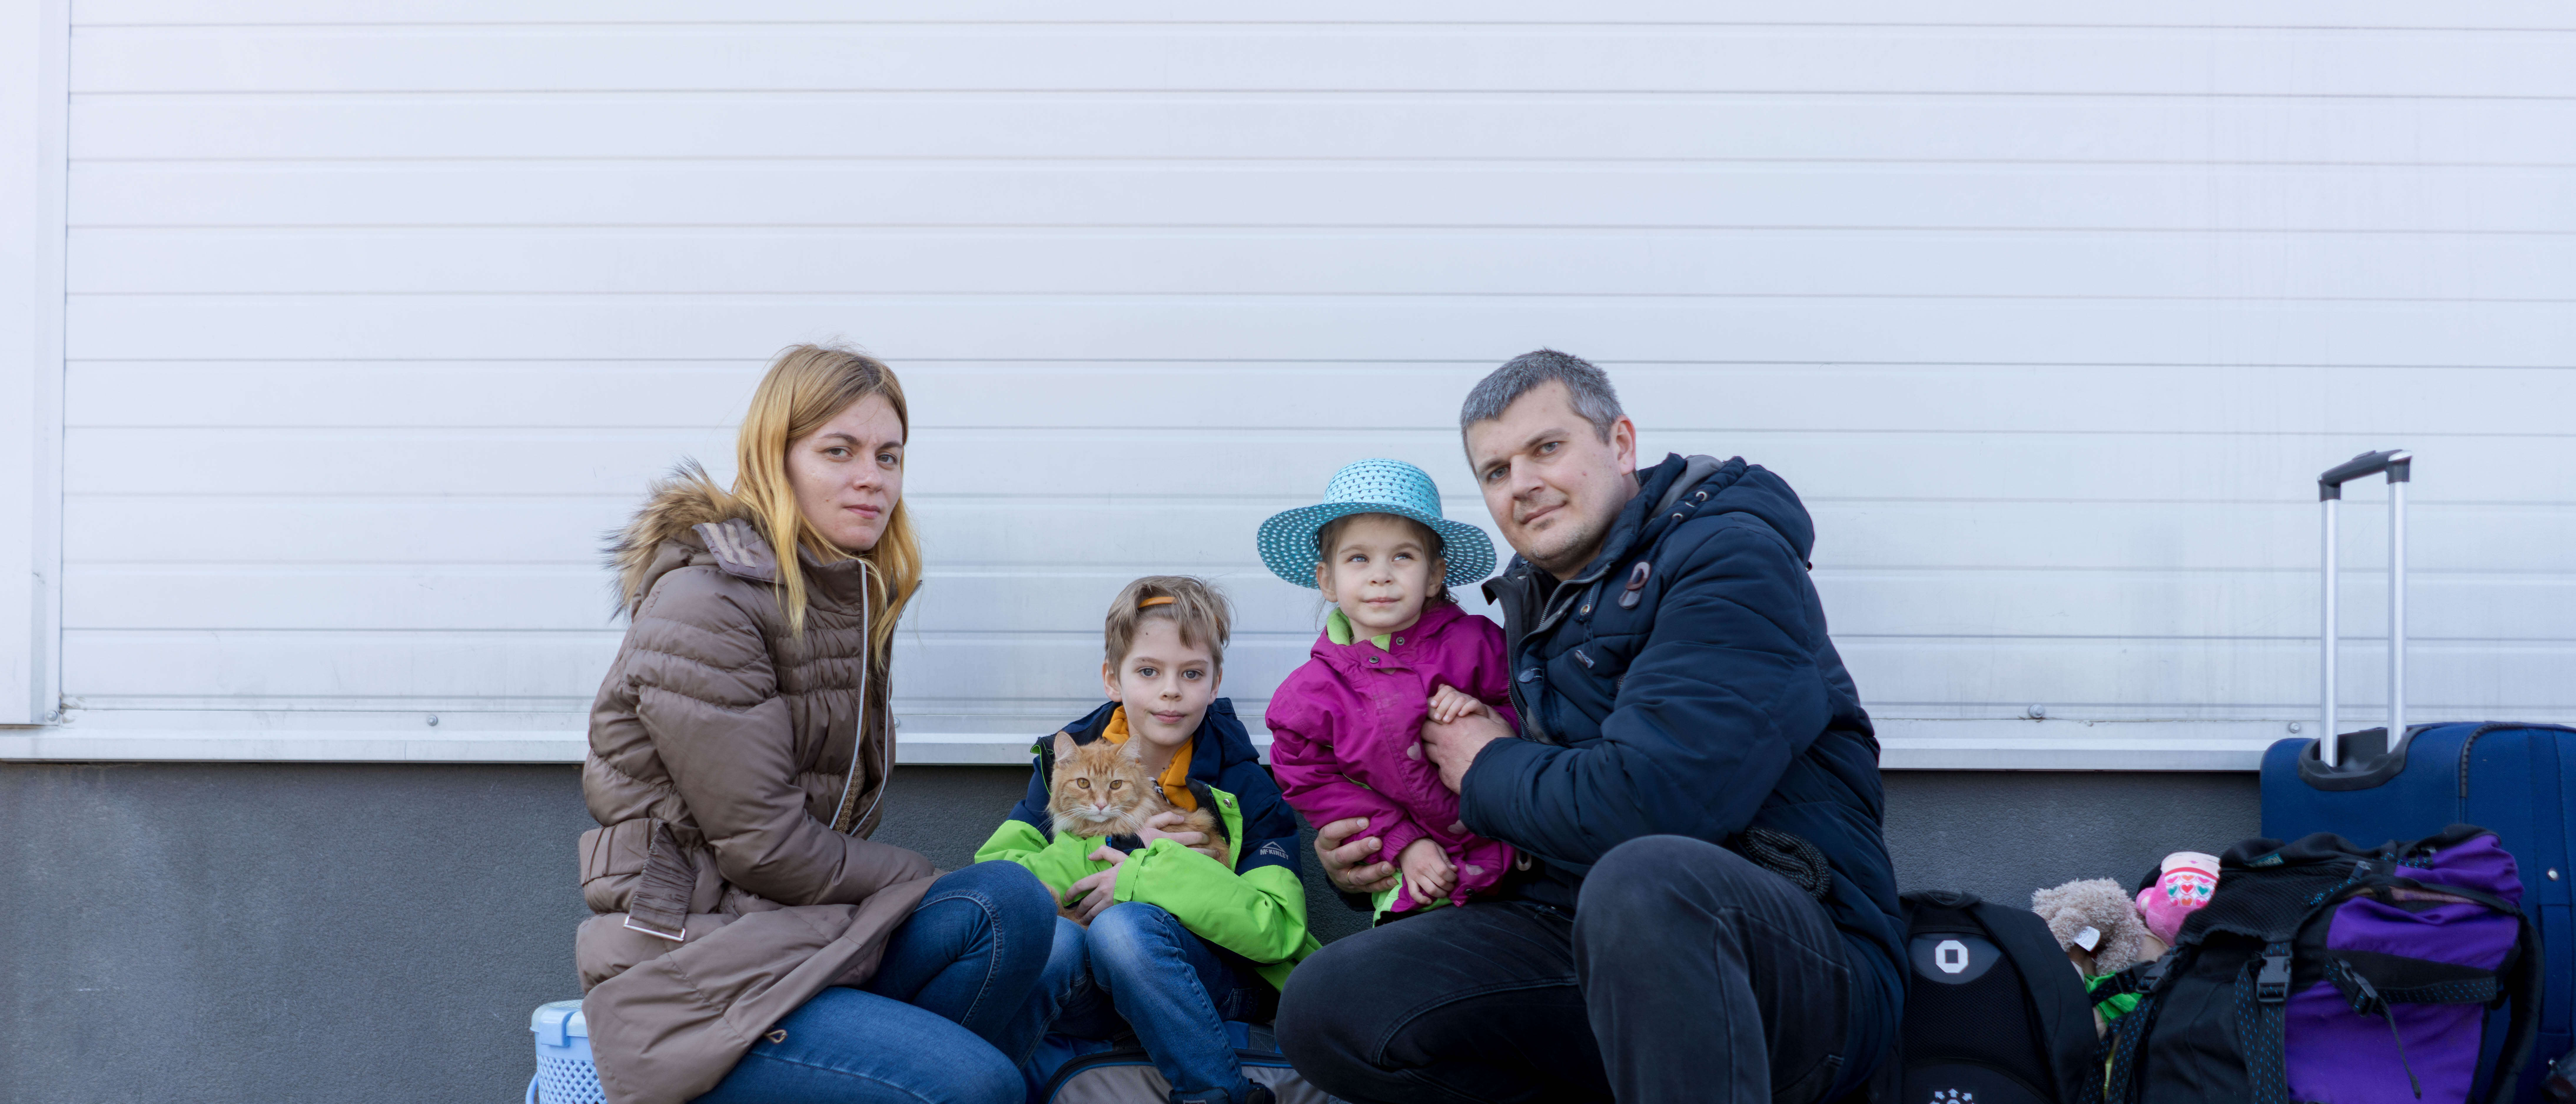 A family of four, who have recently fled war in Ukraine, pose for a picture. One of them, a young boy, holds the family's cat.